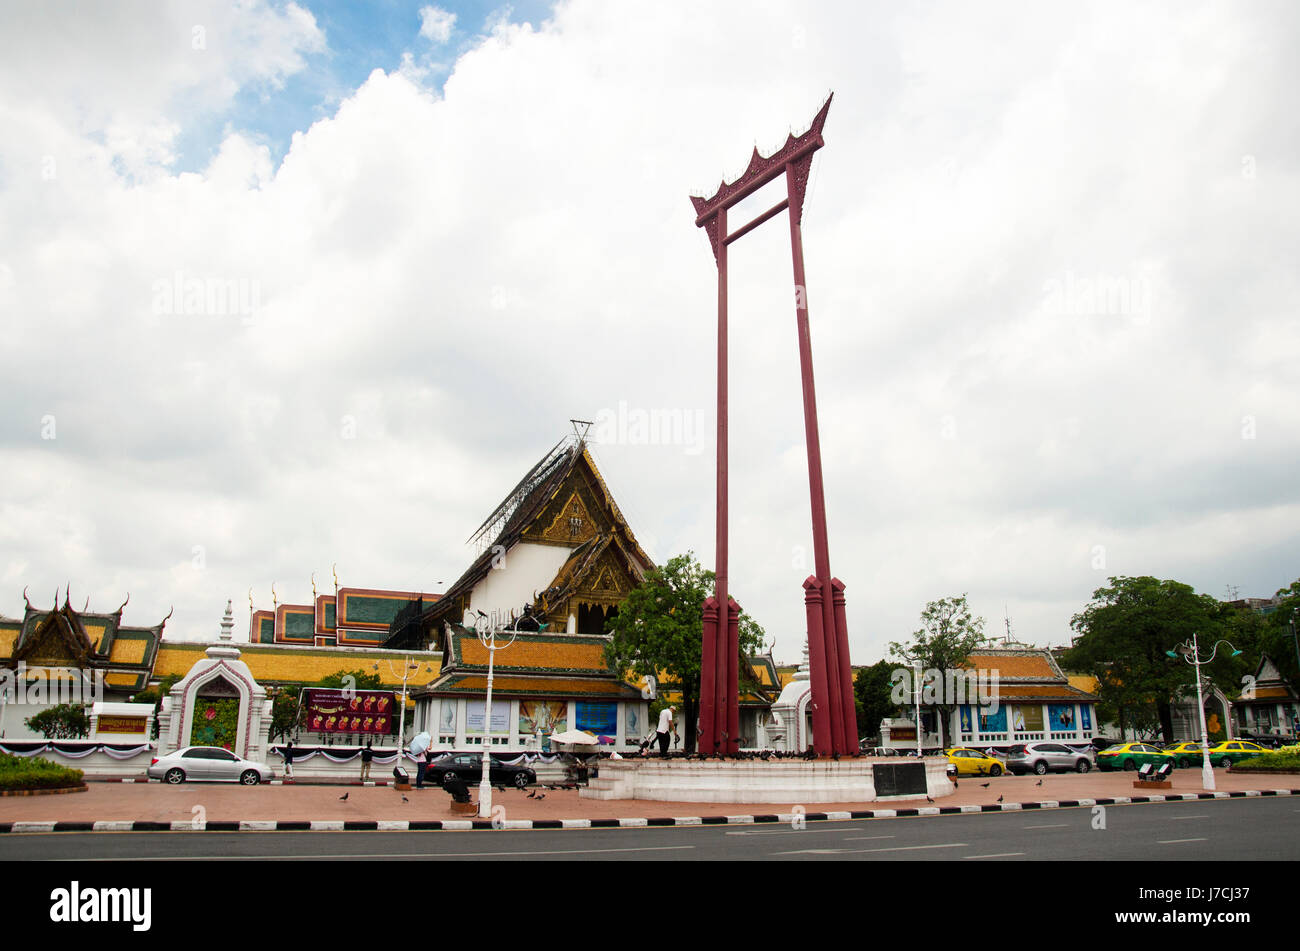 Giant Swing or Sao Chingcha is a religious structure in Phra Nakhon location in front of Wat Suthat Thepphaararam and traffic road on May 11, 2017 in  Stock Photo